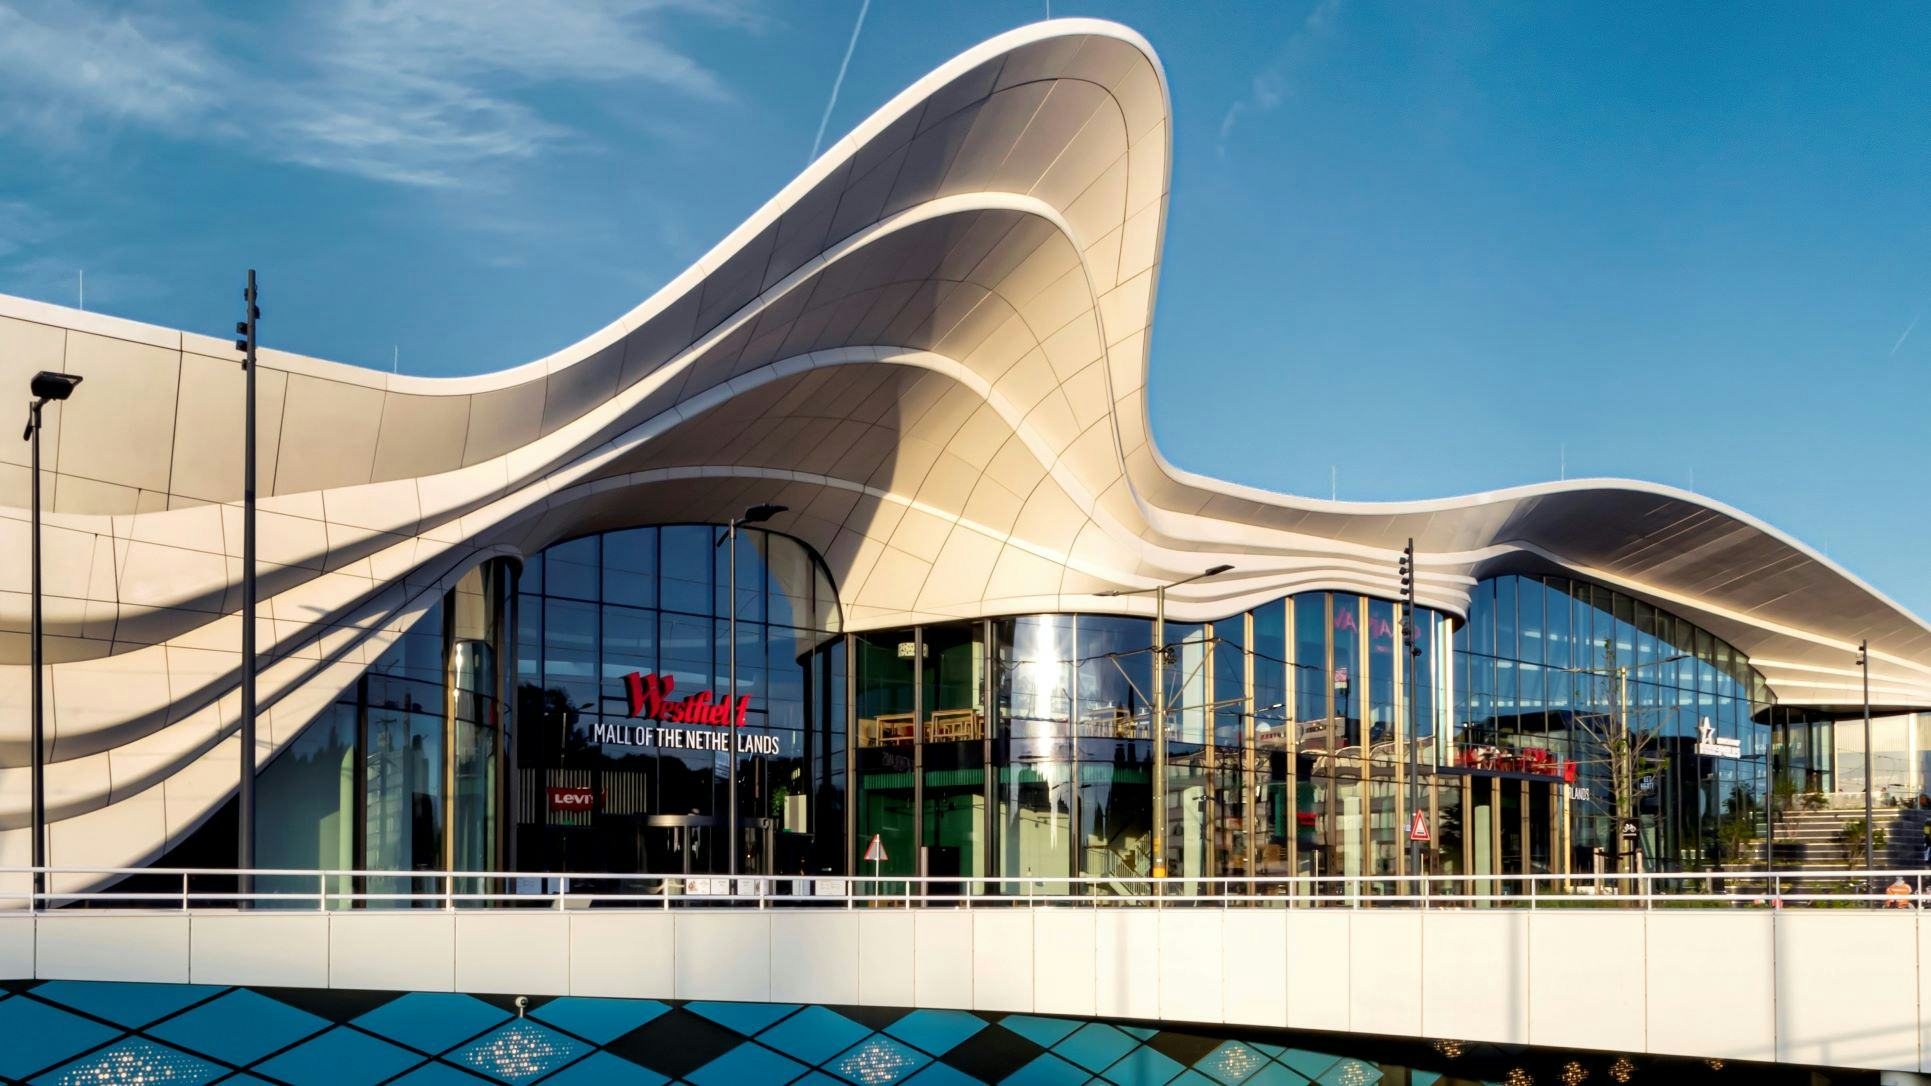 Westfield Mall of the Netherlands